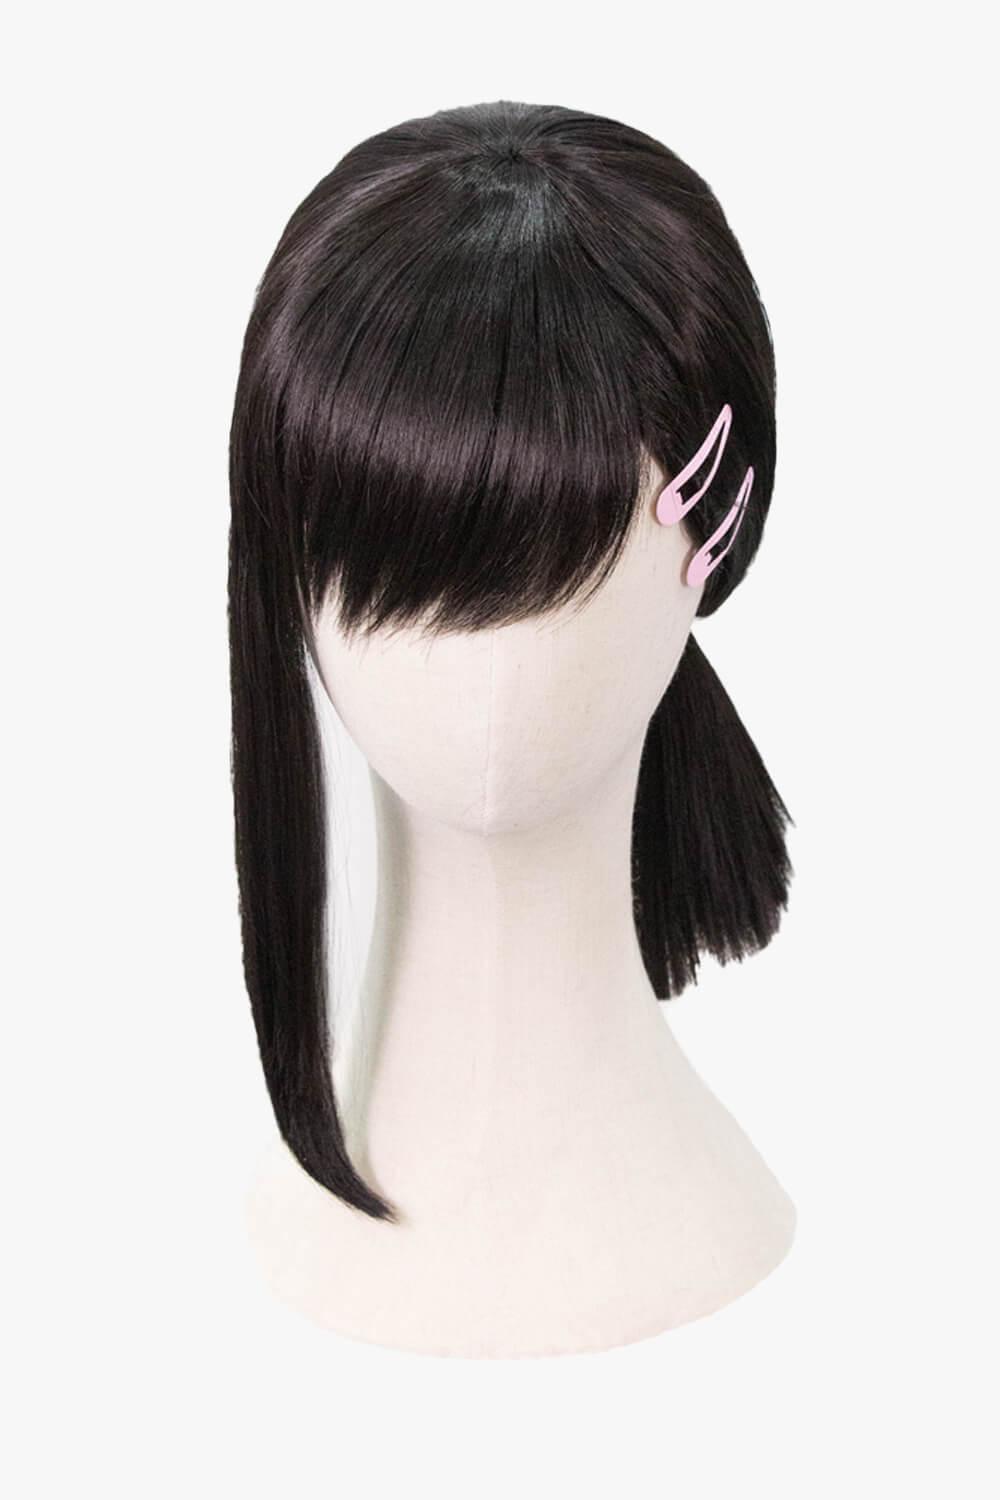 Chainsaw Man Kobeni Wig Cosplay - Aesthetic Clothes Shop